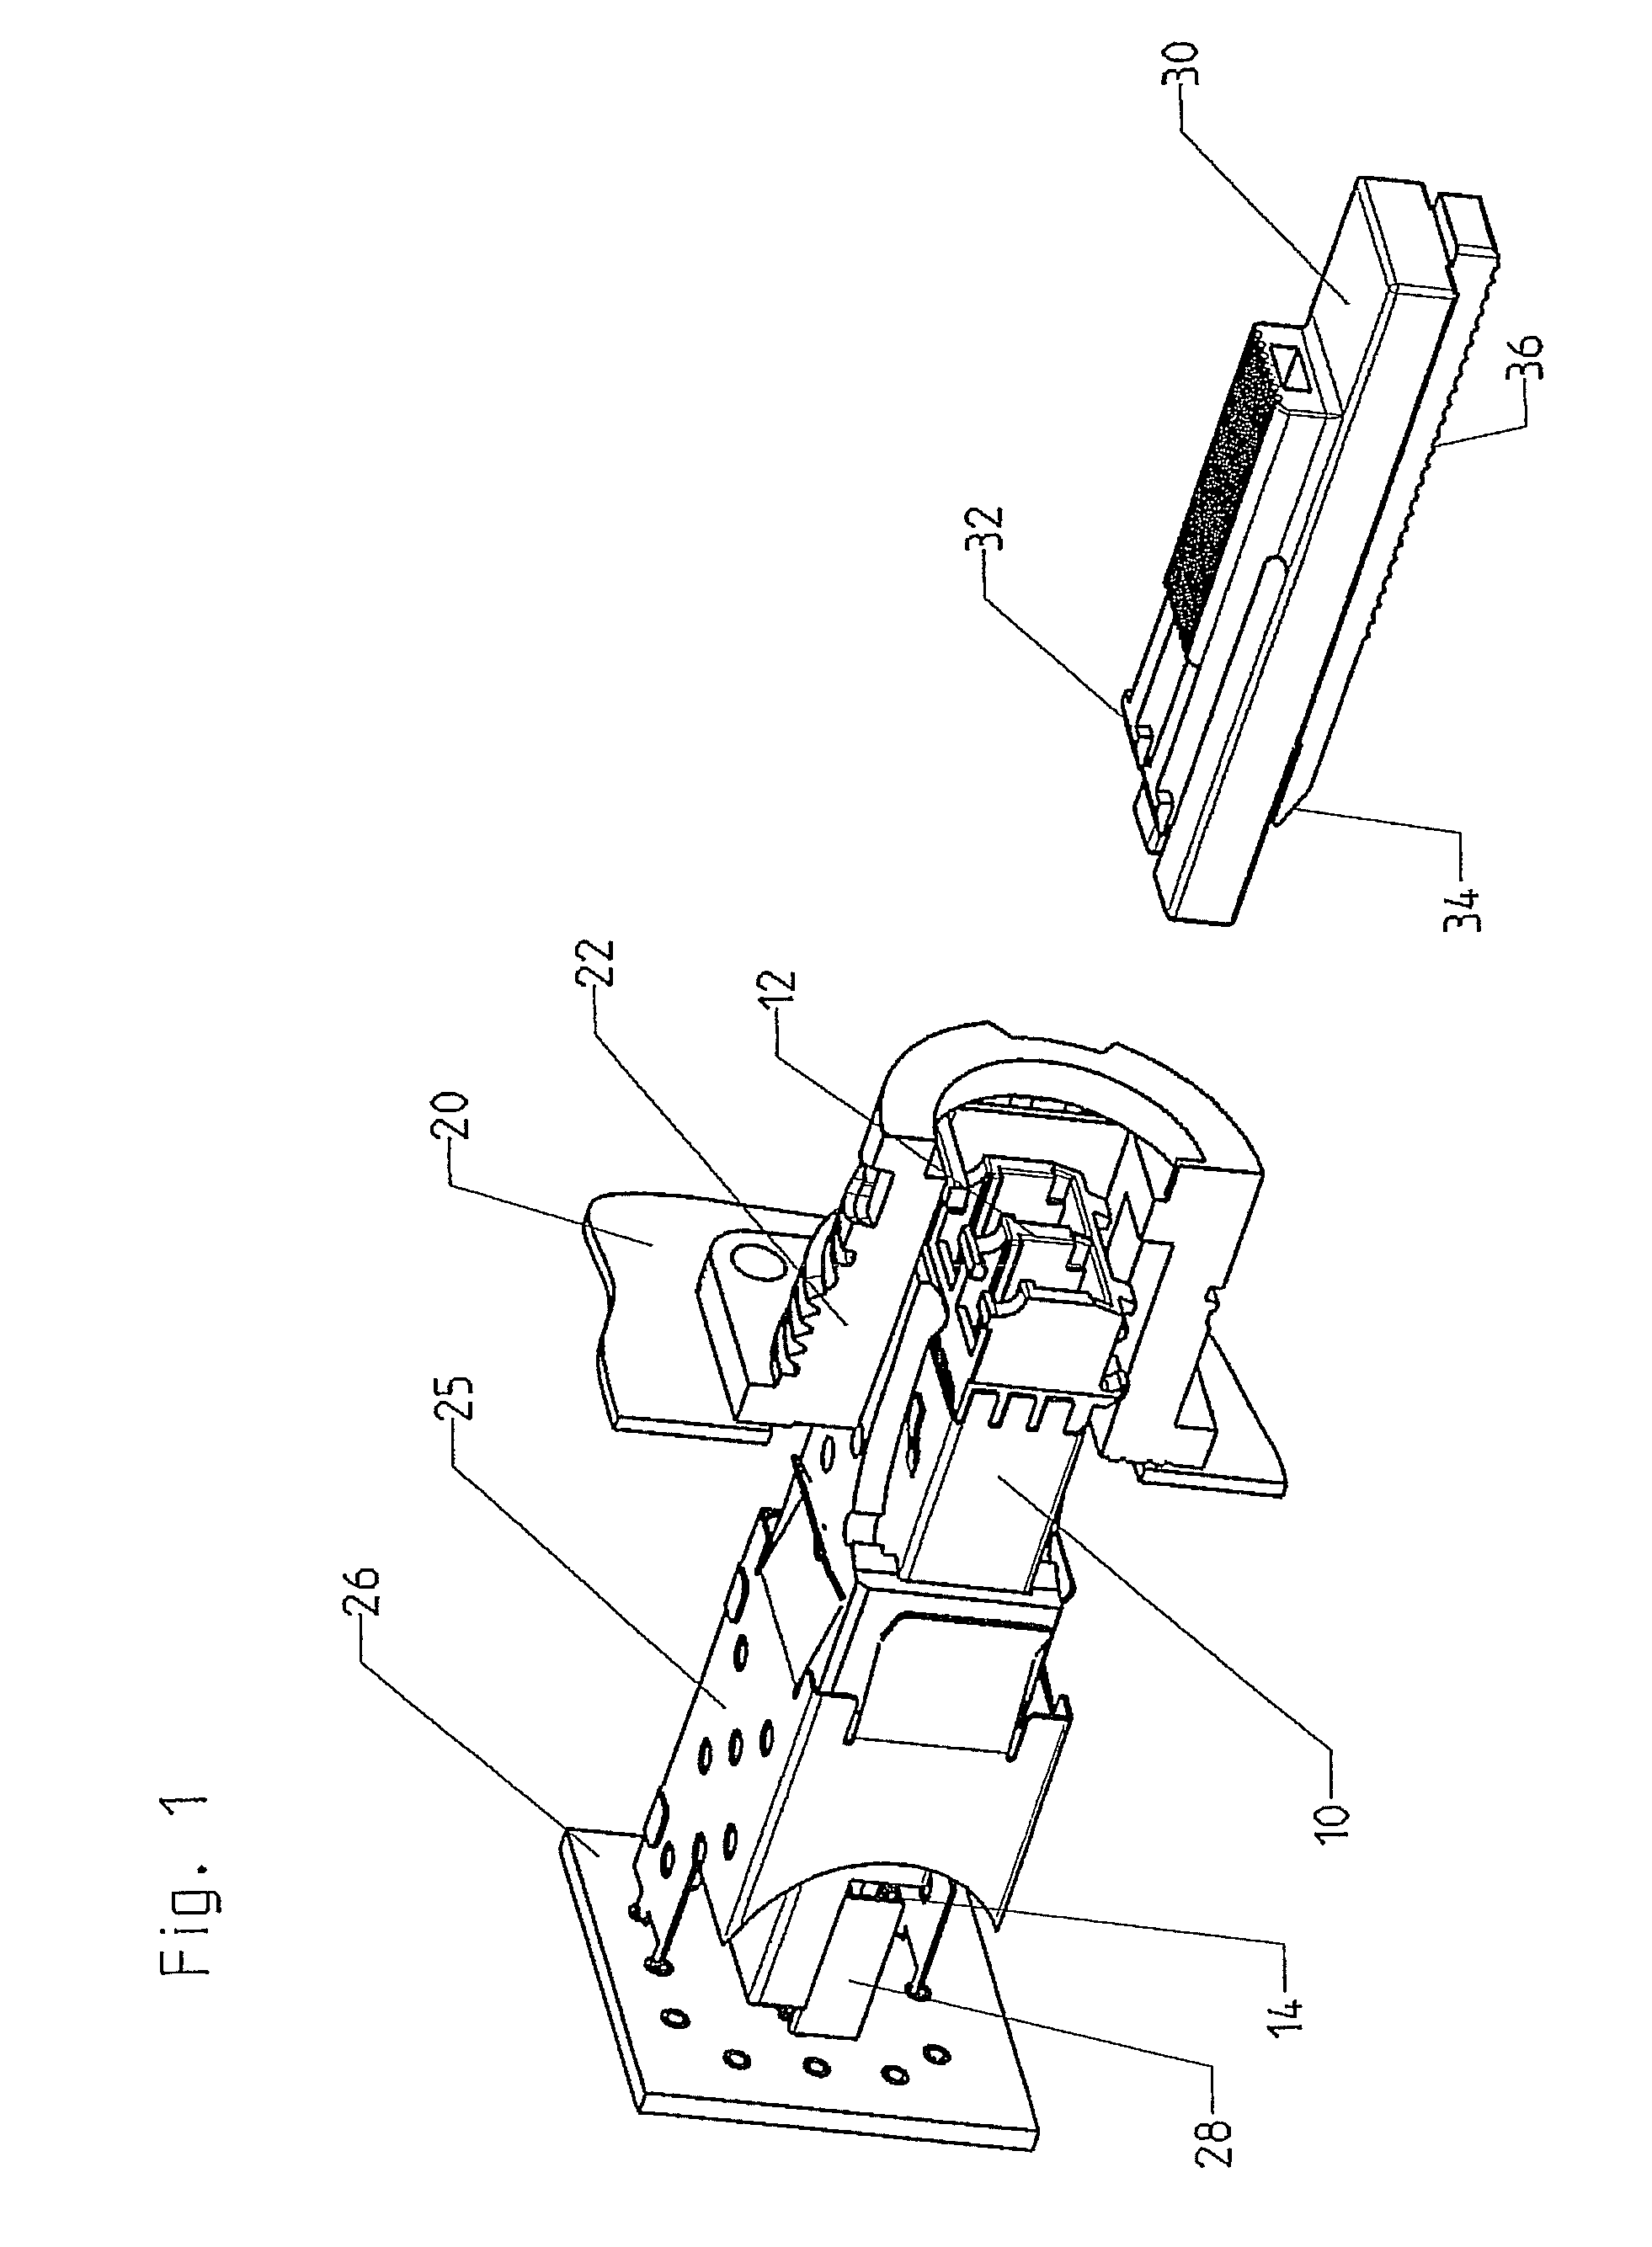 Device for releasing a transceiver fixed in a housing via a connection from the housing